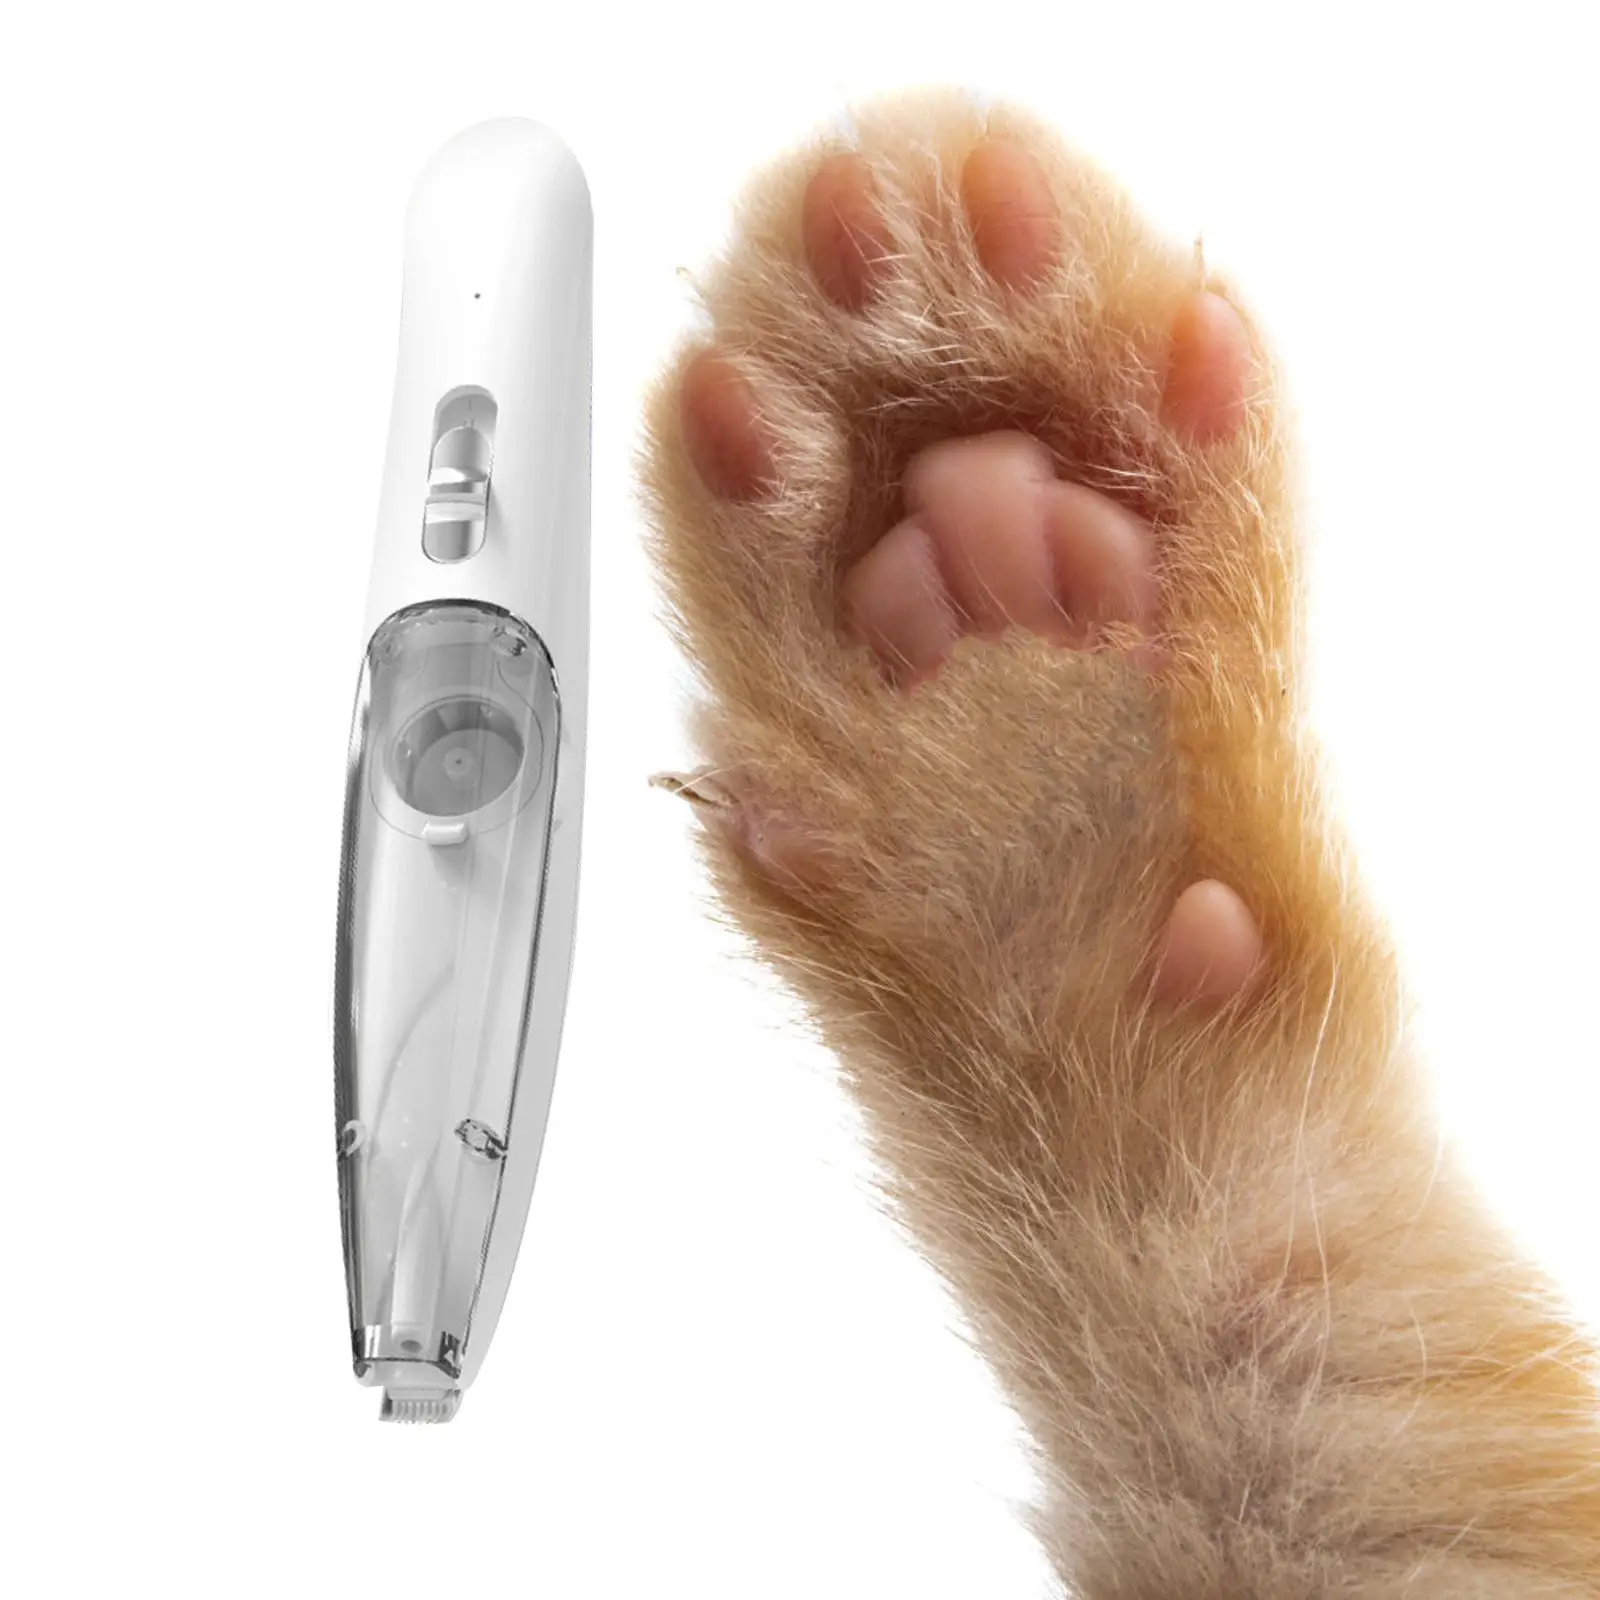 Paw Hair Trimmer for Dog Cordless Paw Trimmer Light Puppy Grooming Trimmer Cat Trimmer for Pets Dogs Cats Grooming Tools